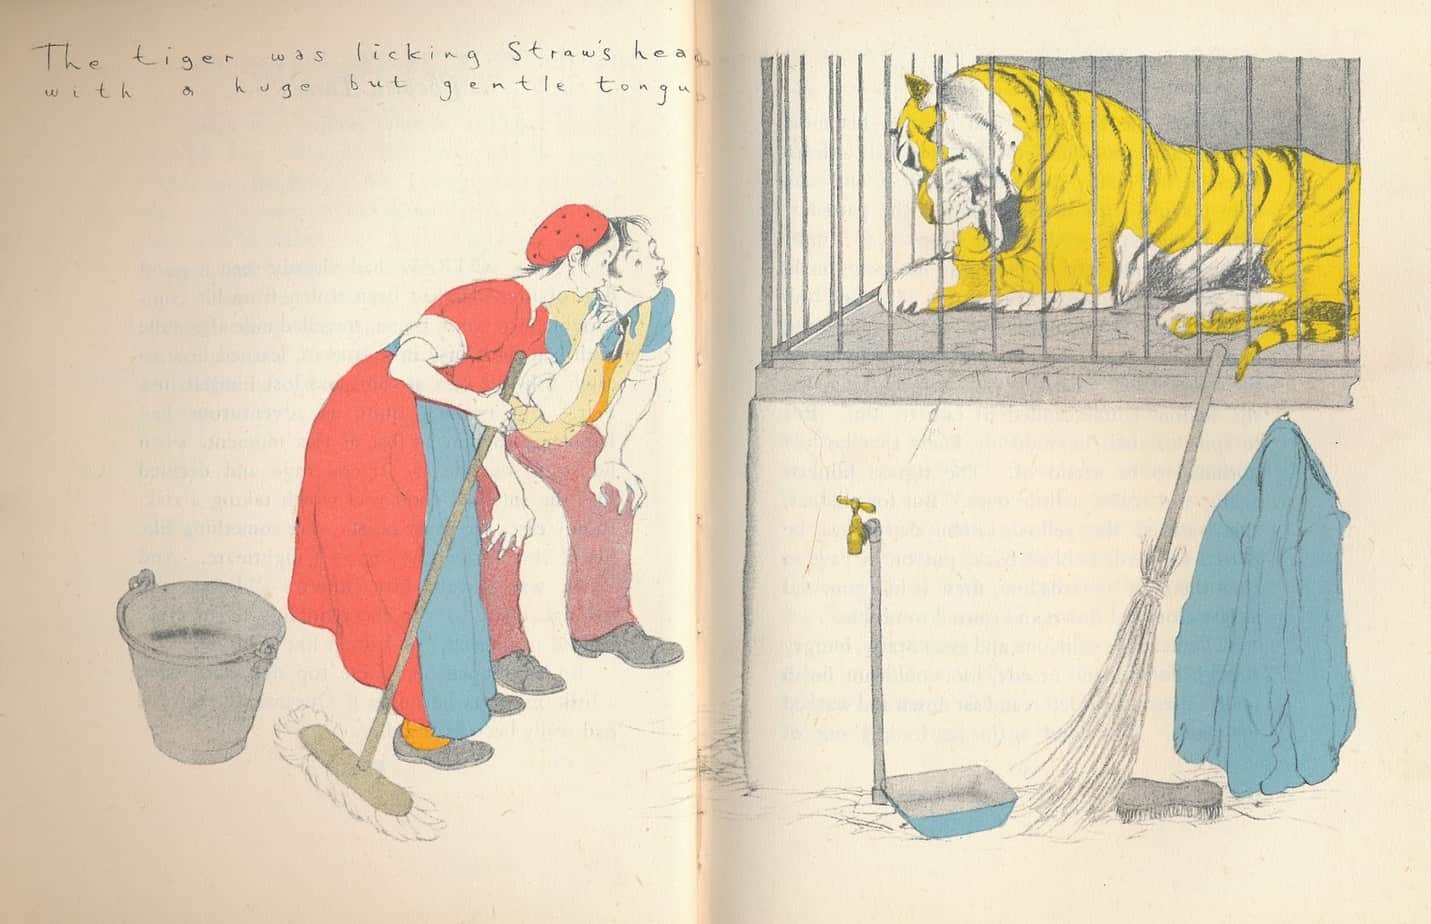 'The Yellow Cat' By Mary Grigs, Illustrated By Isobel and John Morton Sale (Humphrey Milford, Oxford UP, London, New York, Toronto 1936 - this edition 1946 